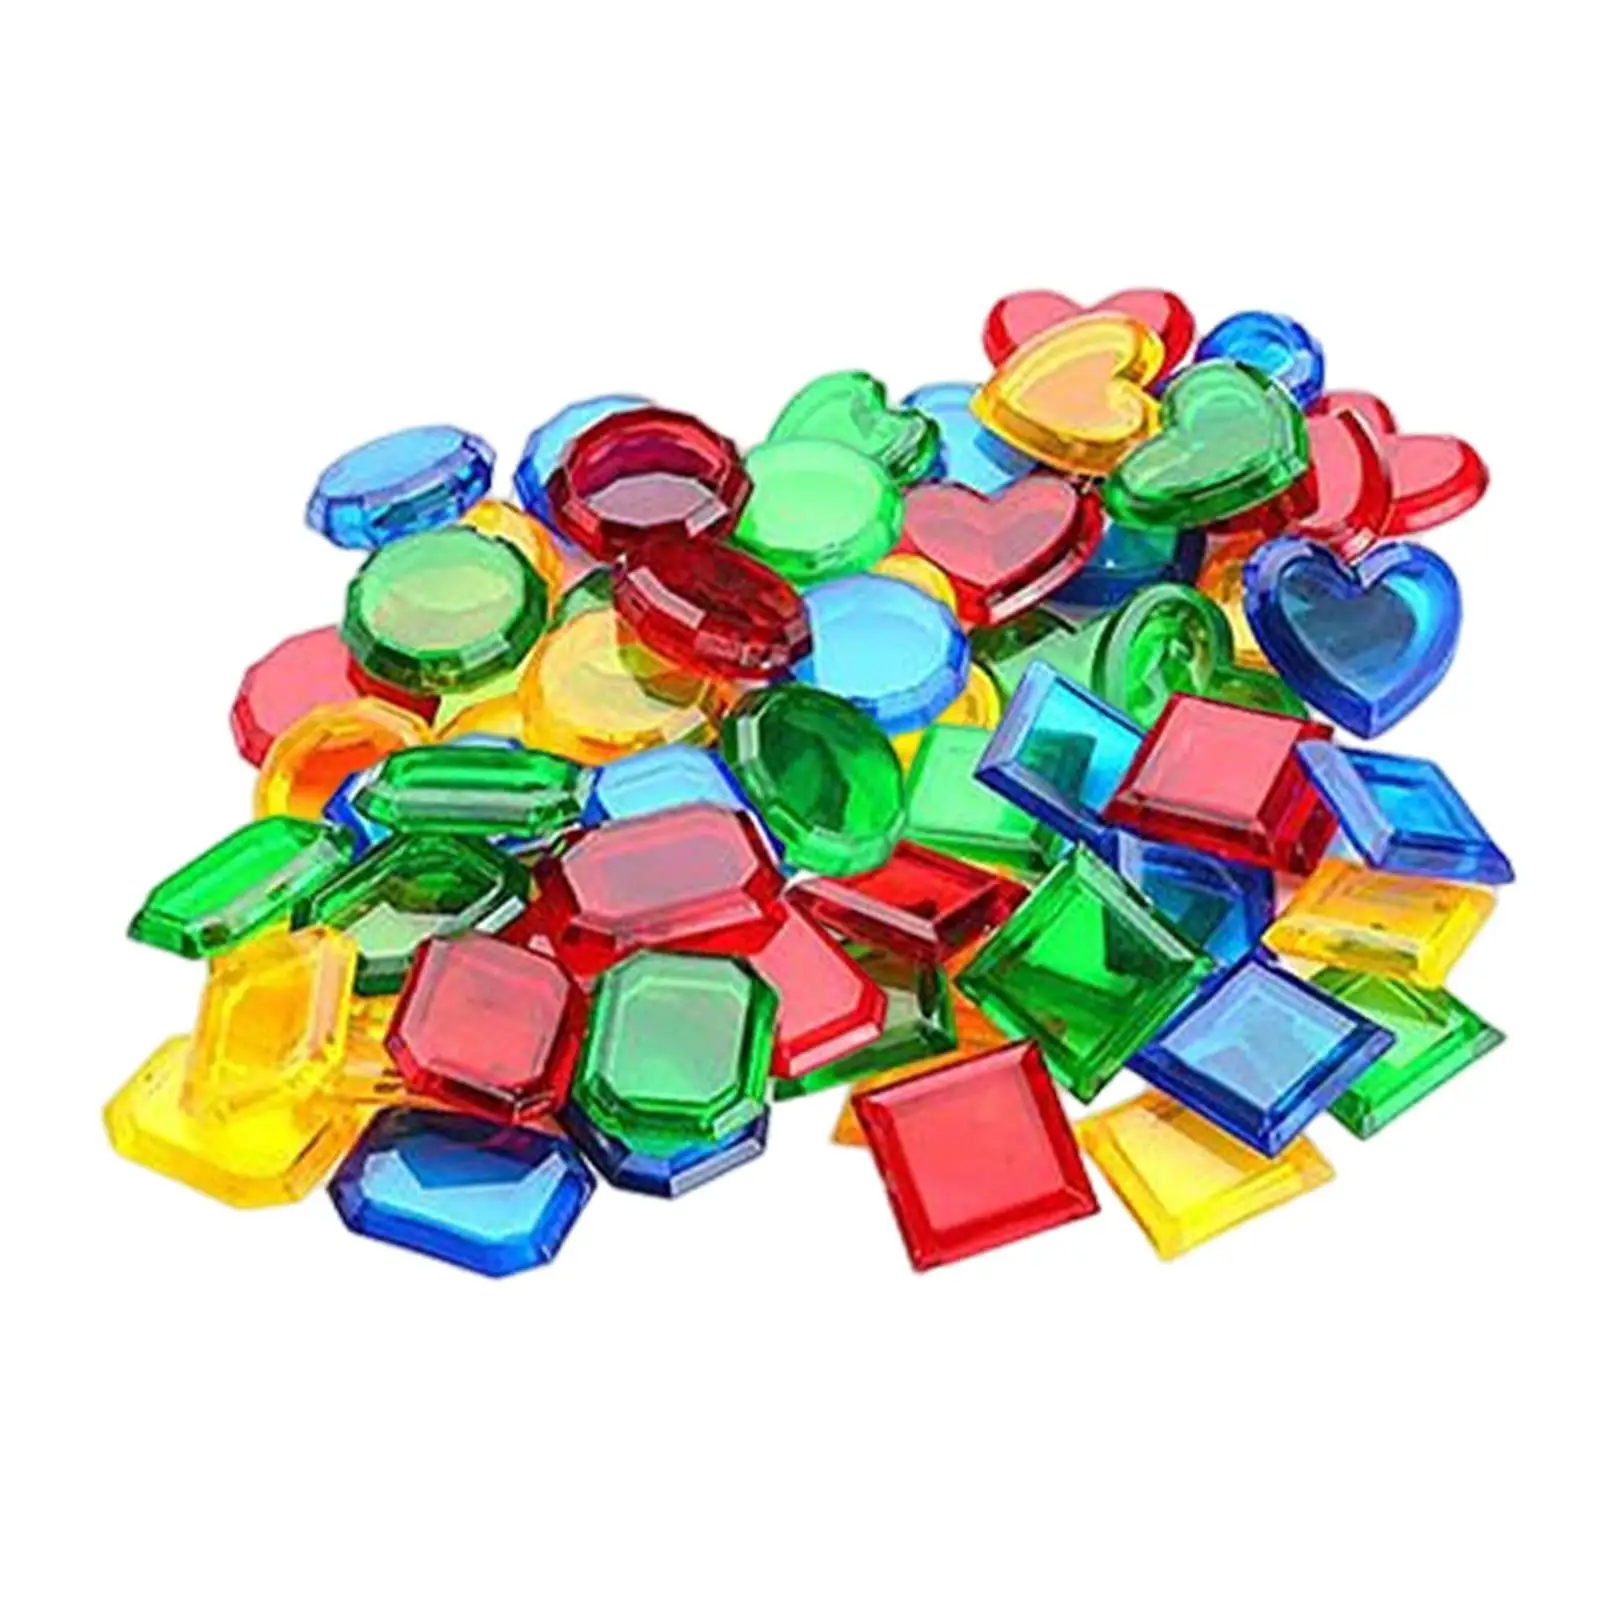 32Pcs Diving toy Sorting for Learning Activities Swimming Pool Beach